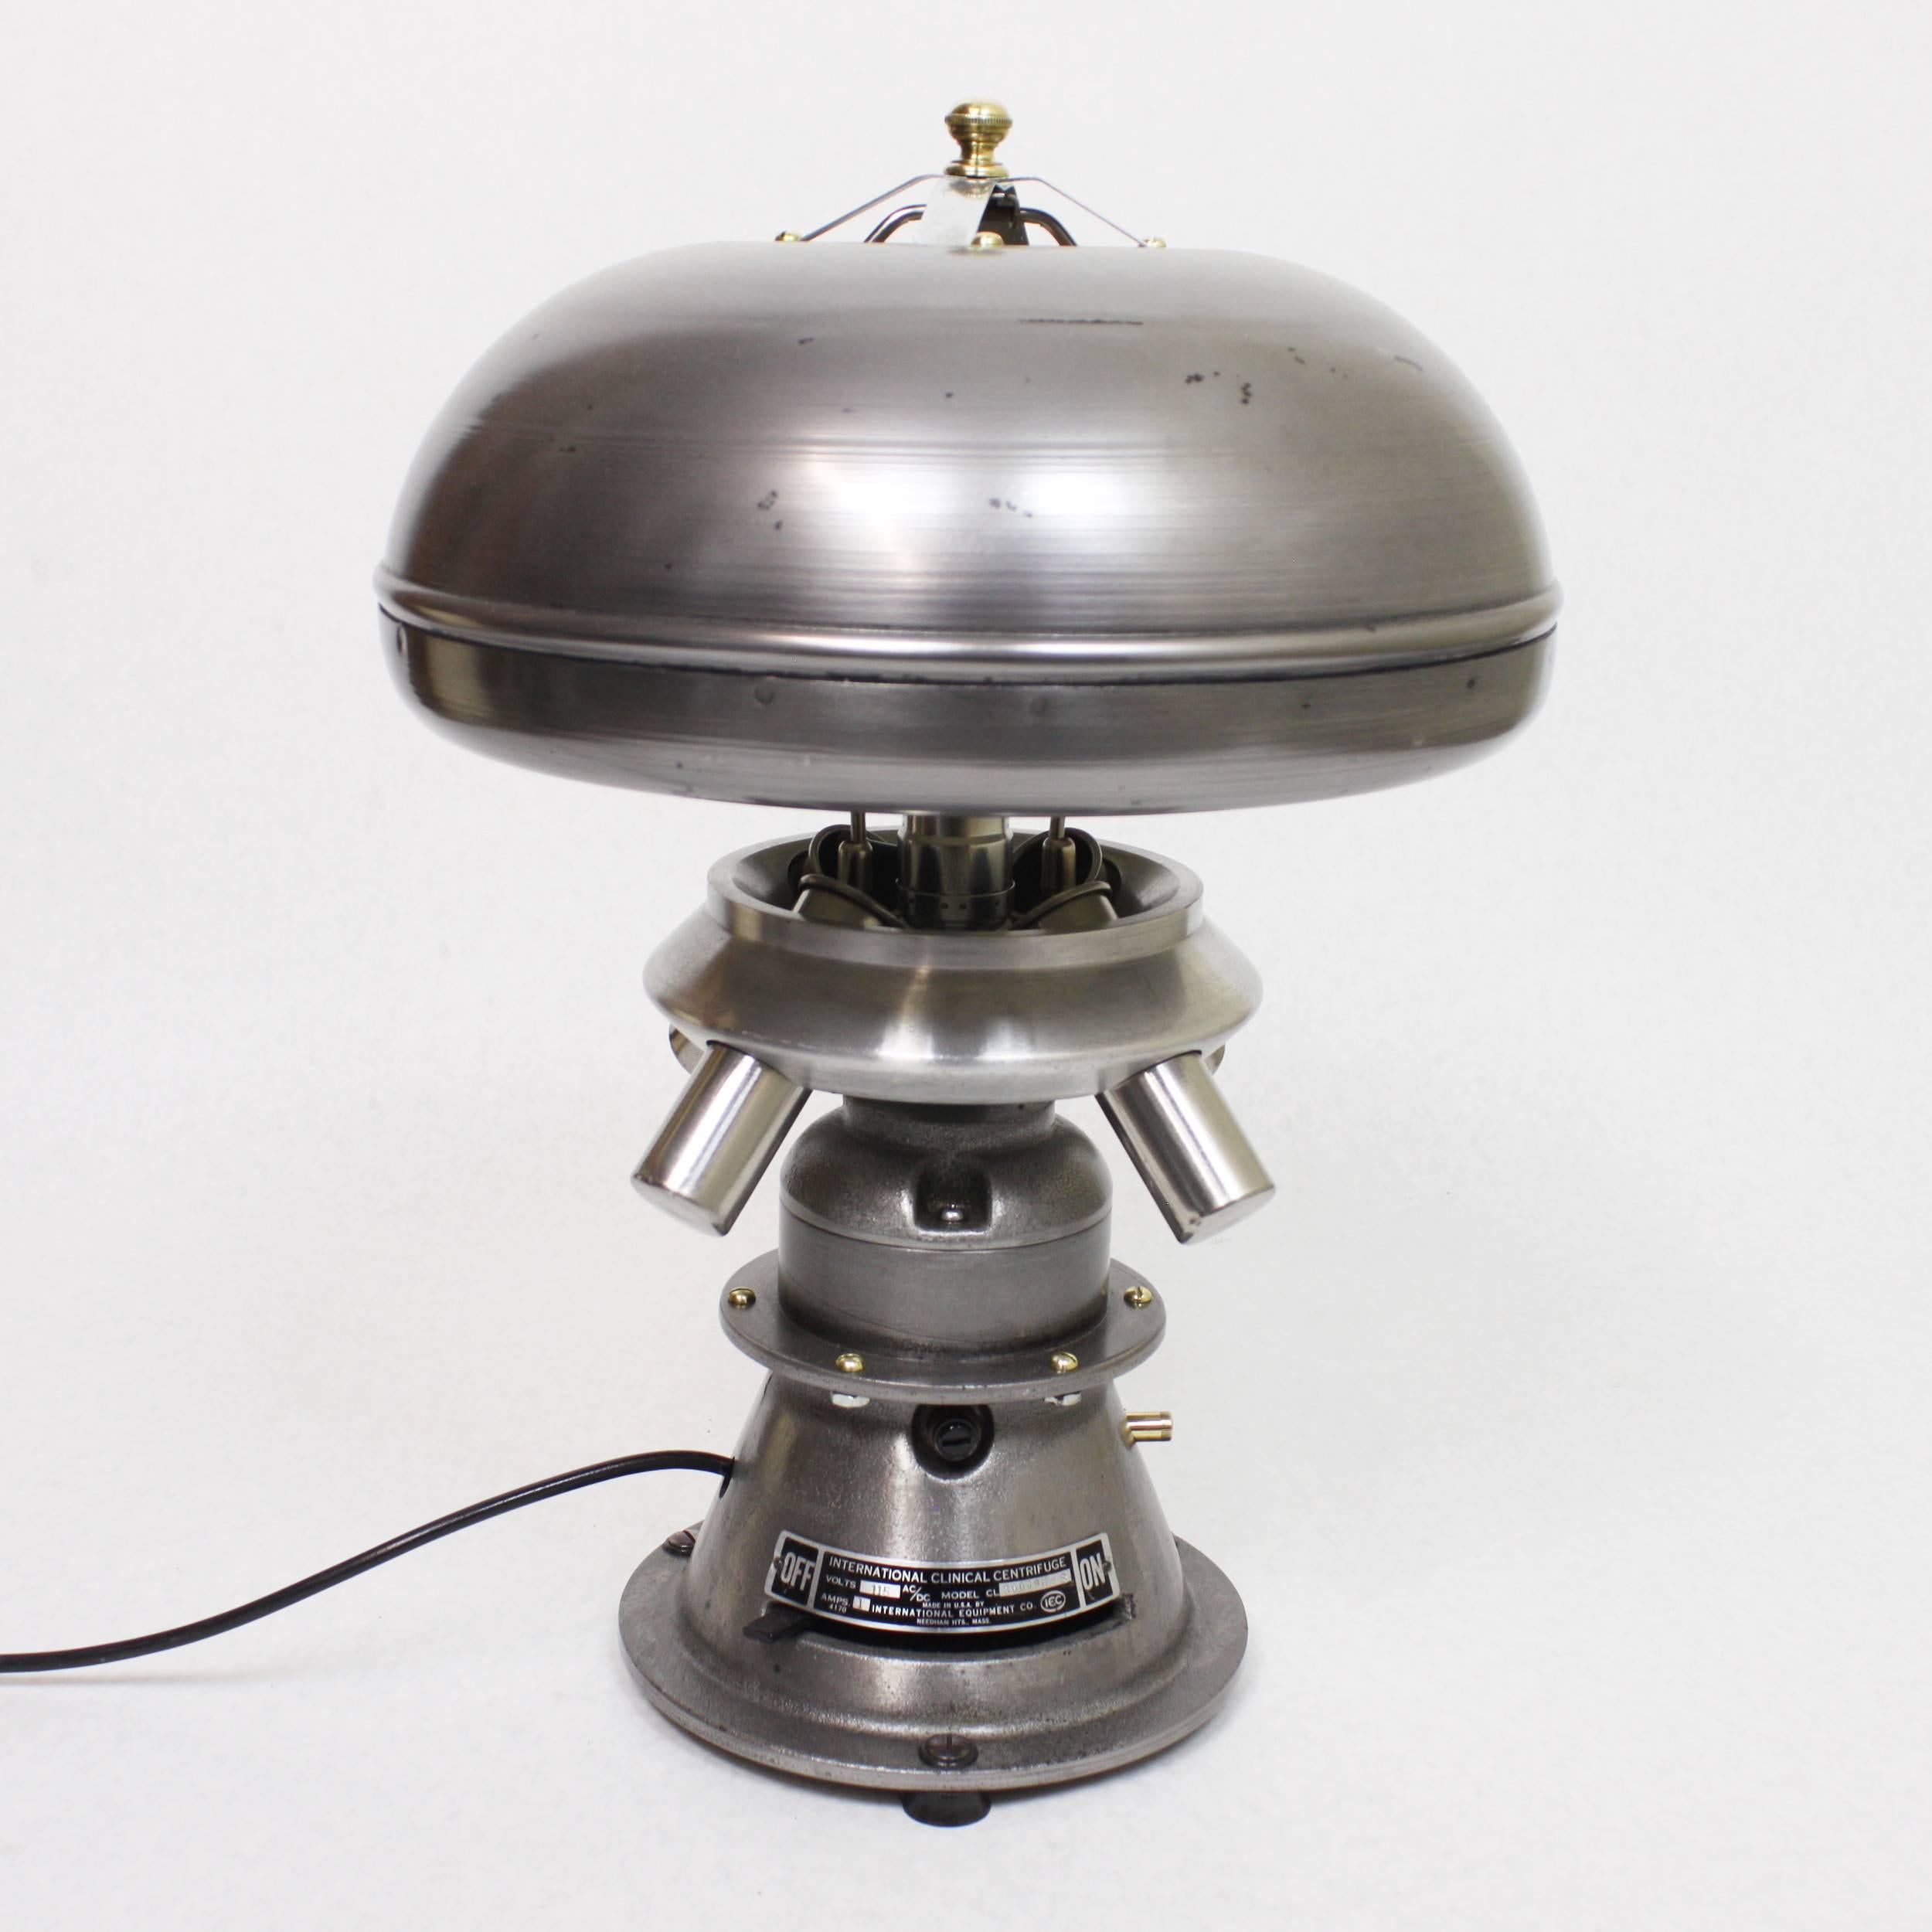 This fantastic little lamp began life as a vintage laboratory centrifuge and has been ingeniously re-purposed in our workshop as this beautiful Industrial table lamp. The centrifuge body was removed from the base and inverted to form a charming